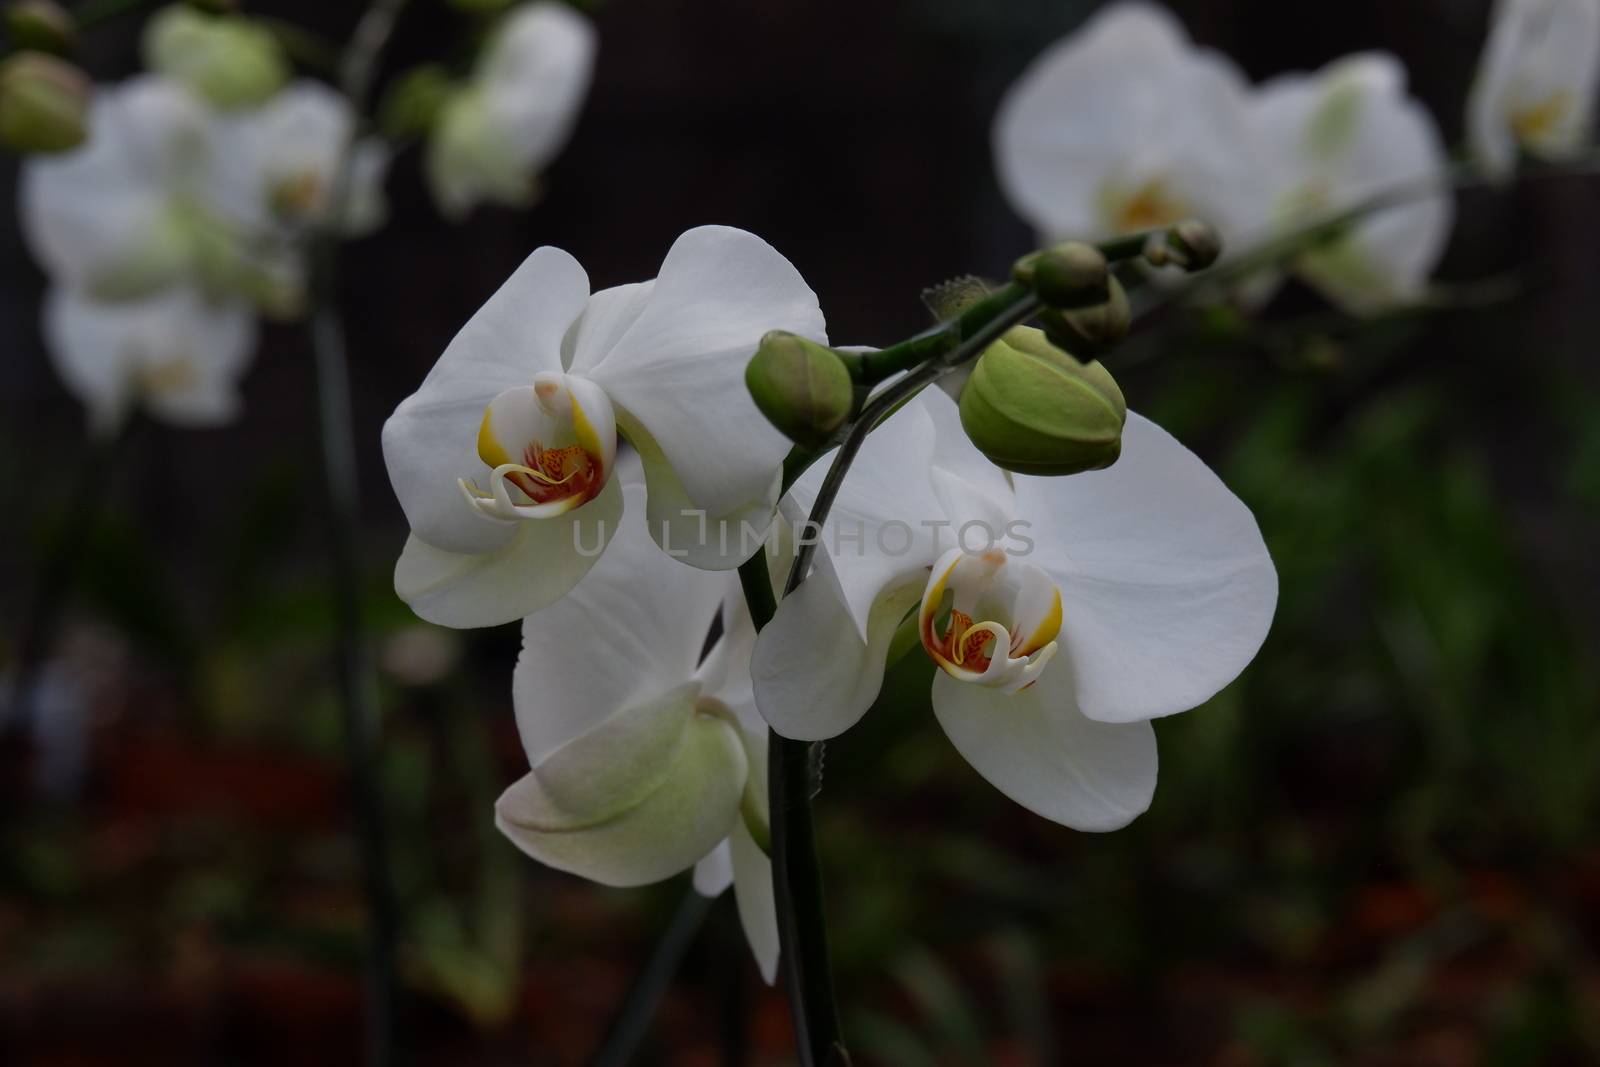 Bunga Anggrek Bulan Putih , Close up view of beautiful white phalaenopsis amabilis / moth orchids in full bloom in the garden with yellow pistils isolated on blur background